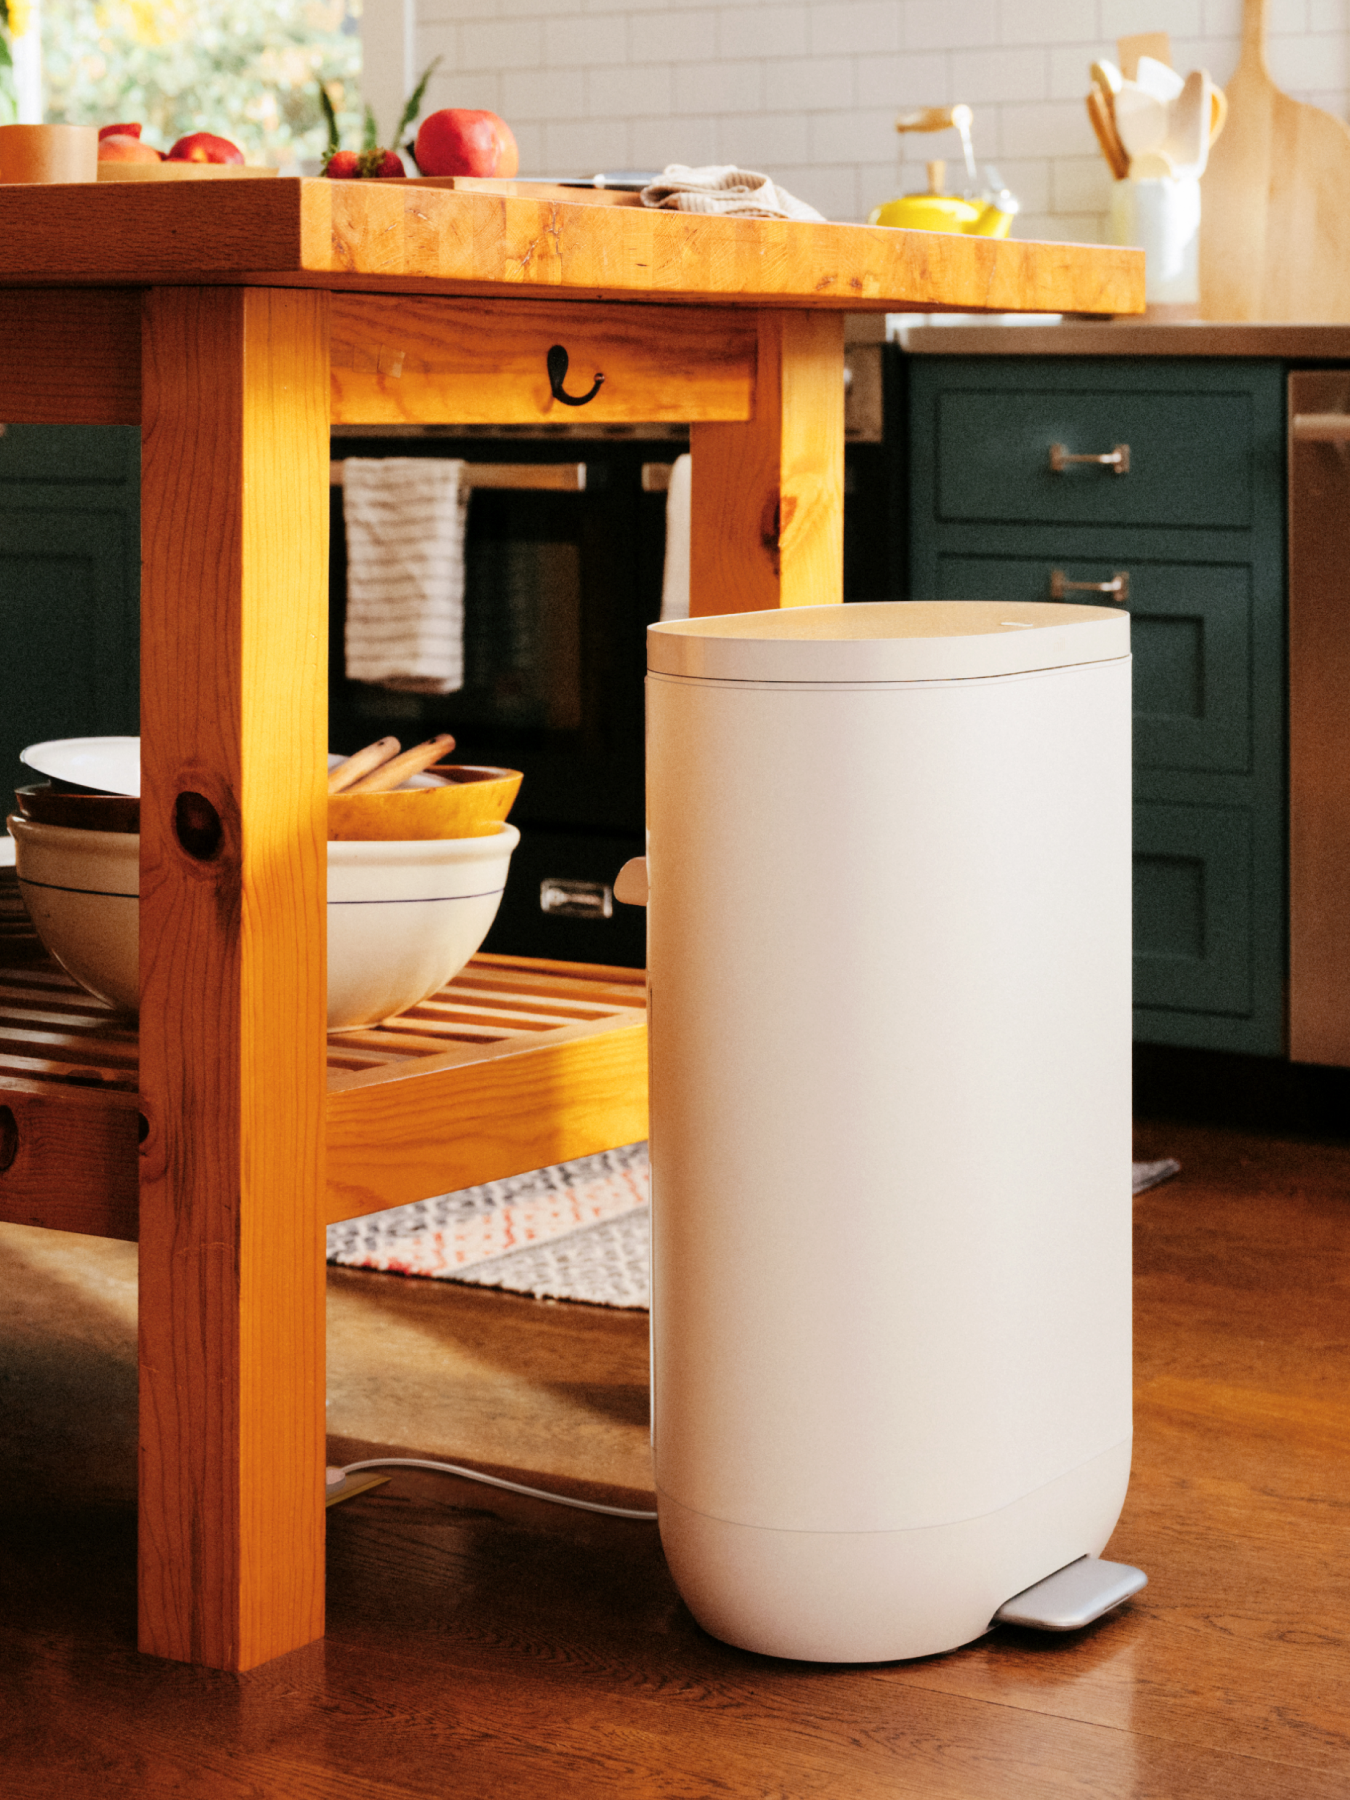 A Mill kitchen bin at home in a classic, open kitchen. 